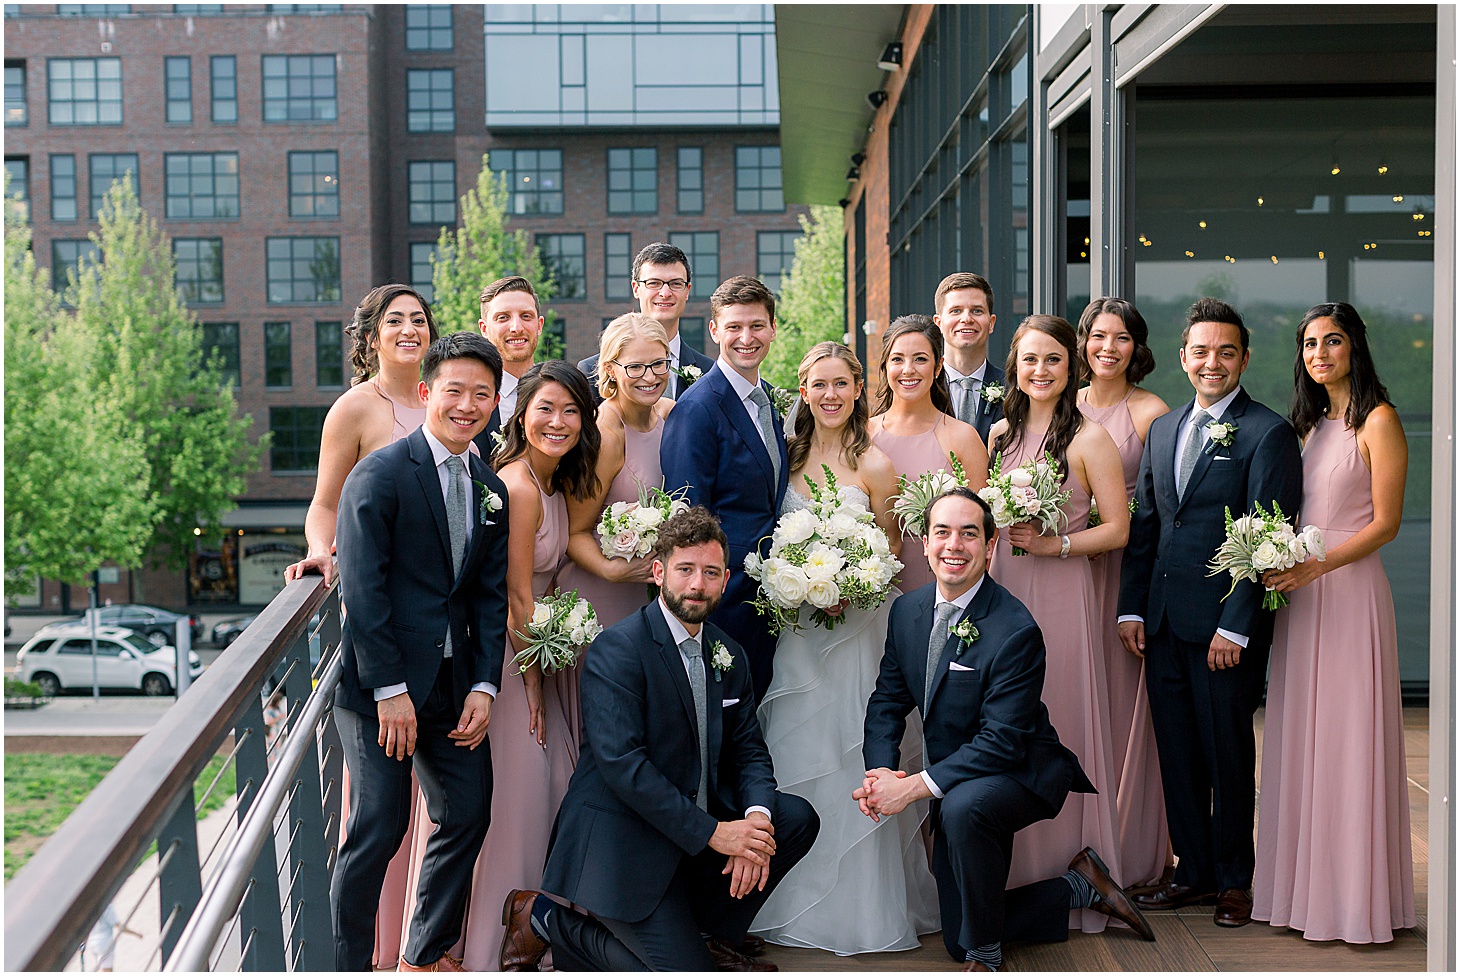 Wedding Party as District Winery in DC, Modern Textural Spring Wedding at District Winery, Sarah Bradshaw Photography, DC Wedding Photographer